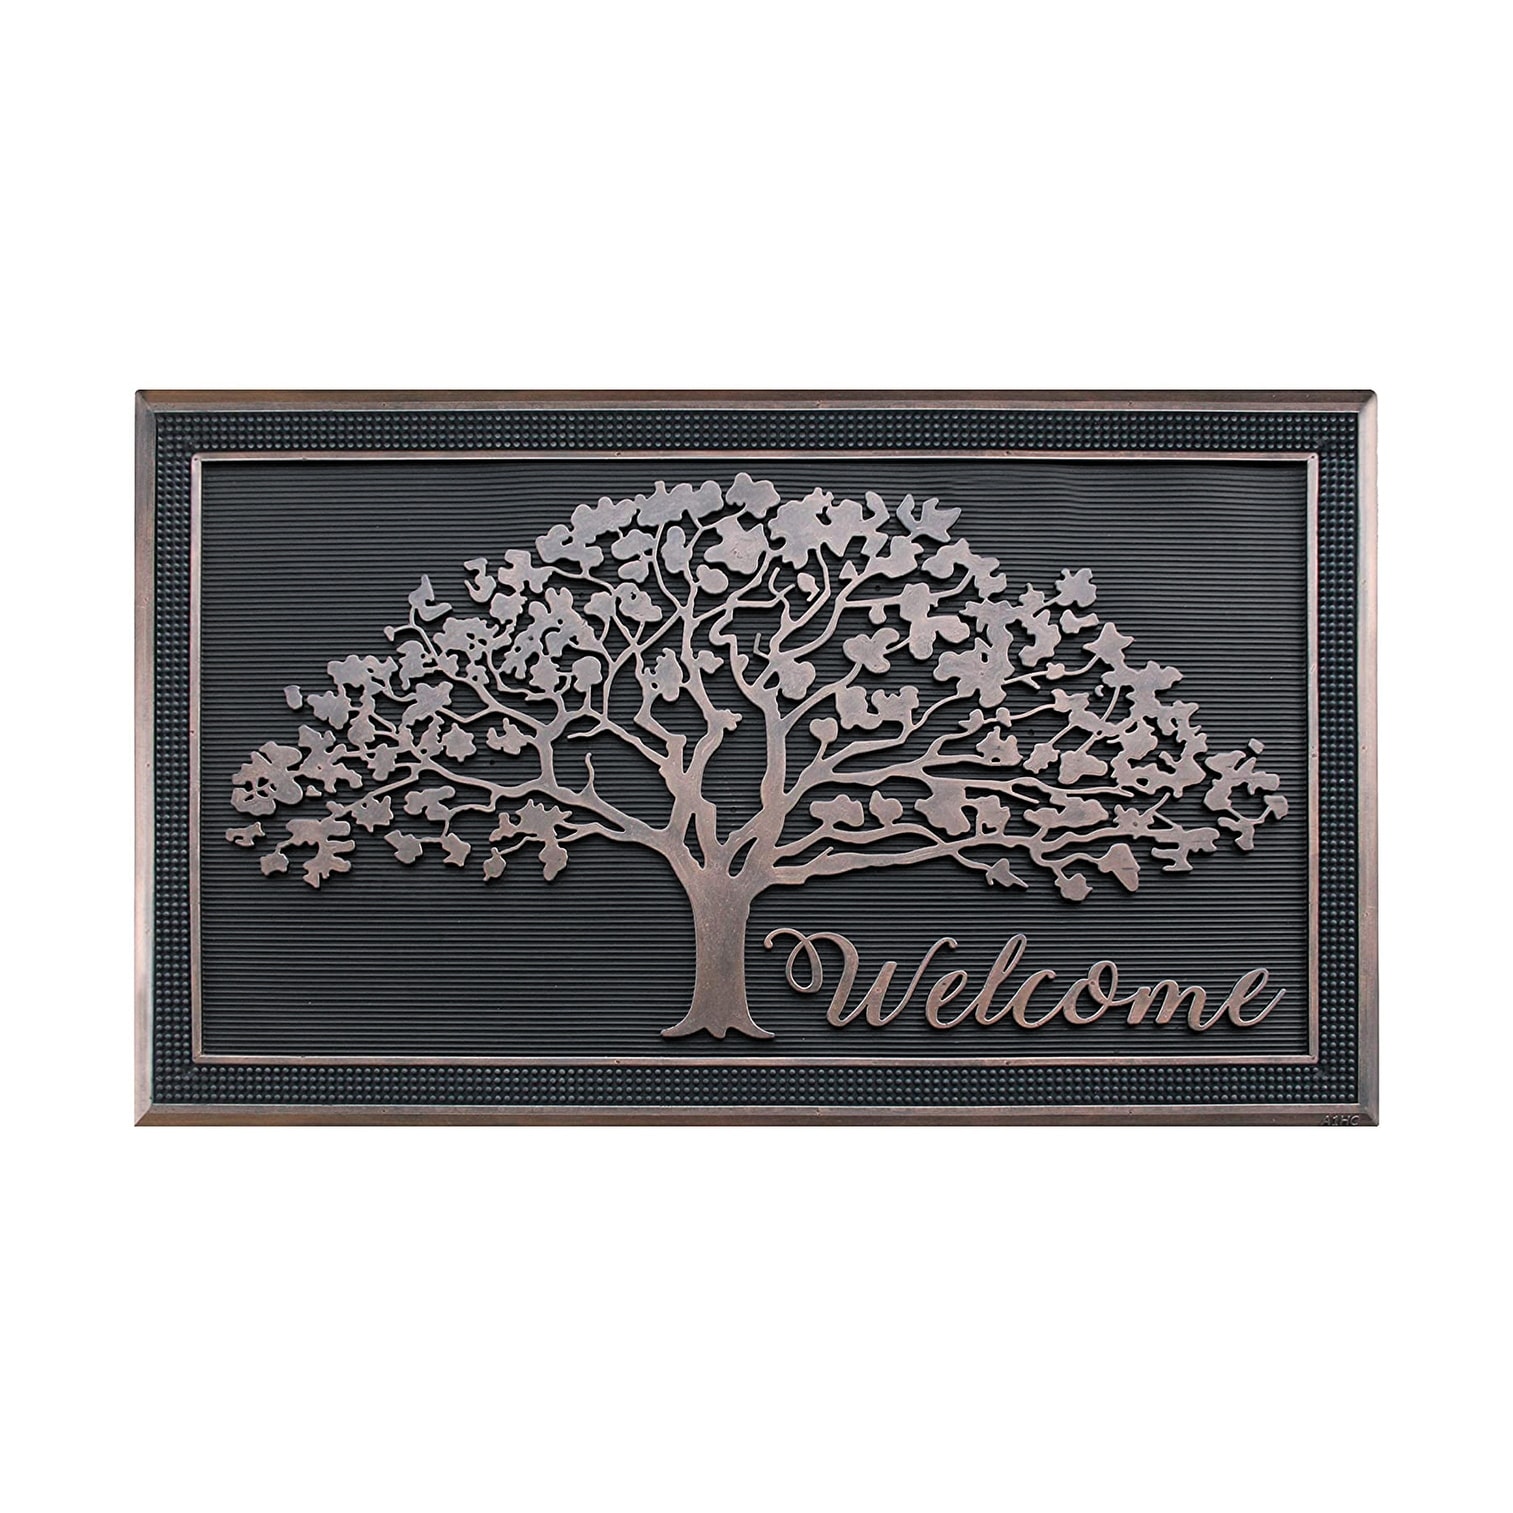 A1HC FIRST IMPRESSION Rectangle Doormat, Rubber and Coir, 30 x 48 Inch, Standard Double / Single Heavy Doormat, Personalized Large Size, Rubber  Backed